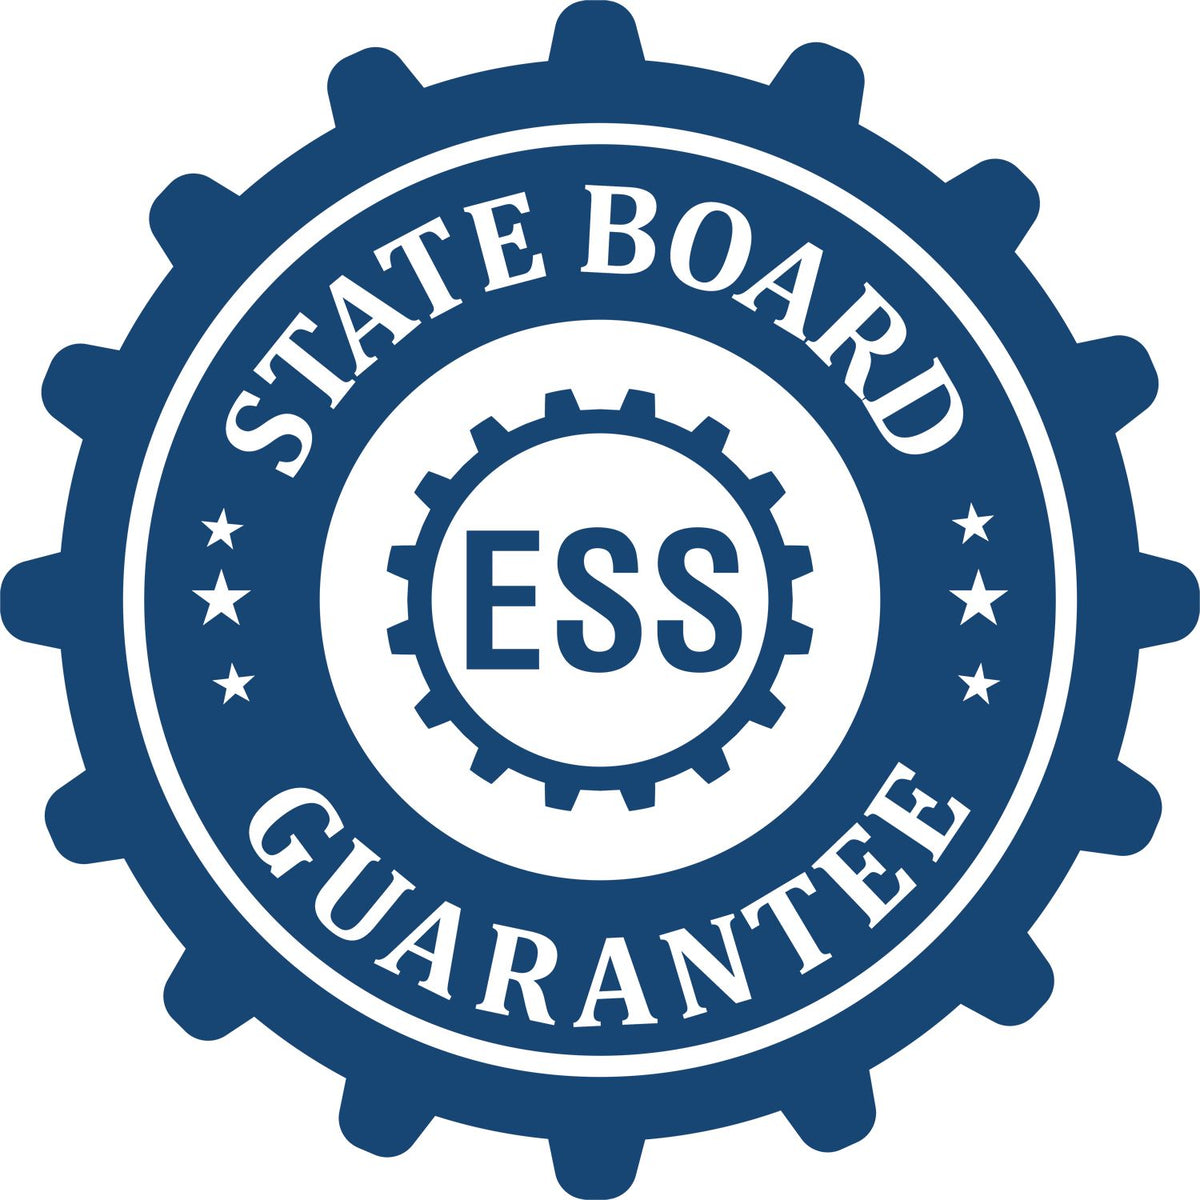 An emblem in a gear shape illustrating a state board guarantee for the Heavy Duty Cast Iron Illinois Architect Embosser product.